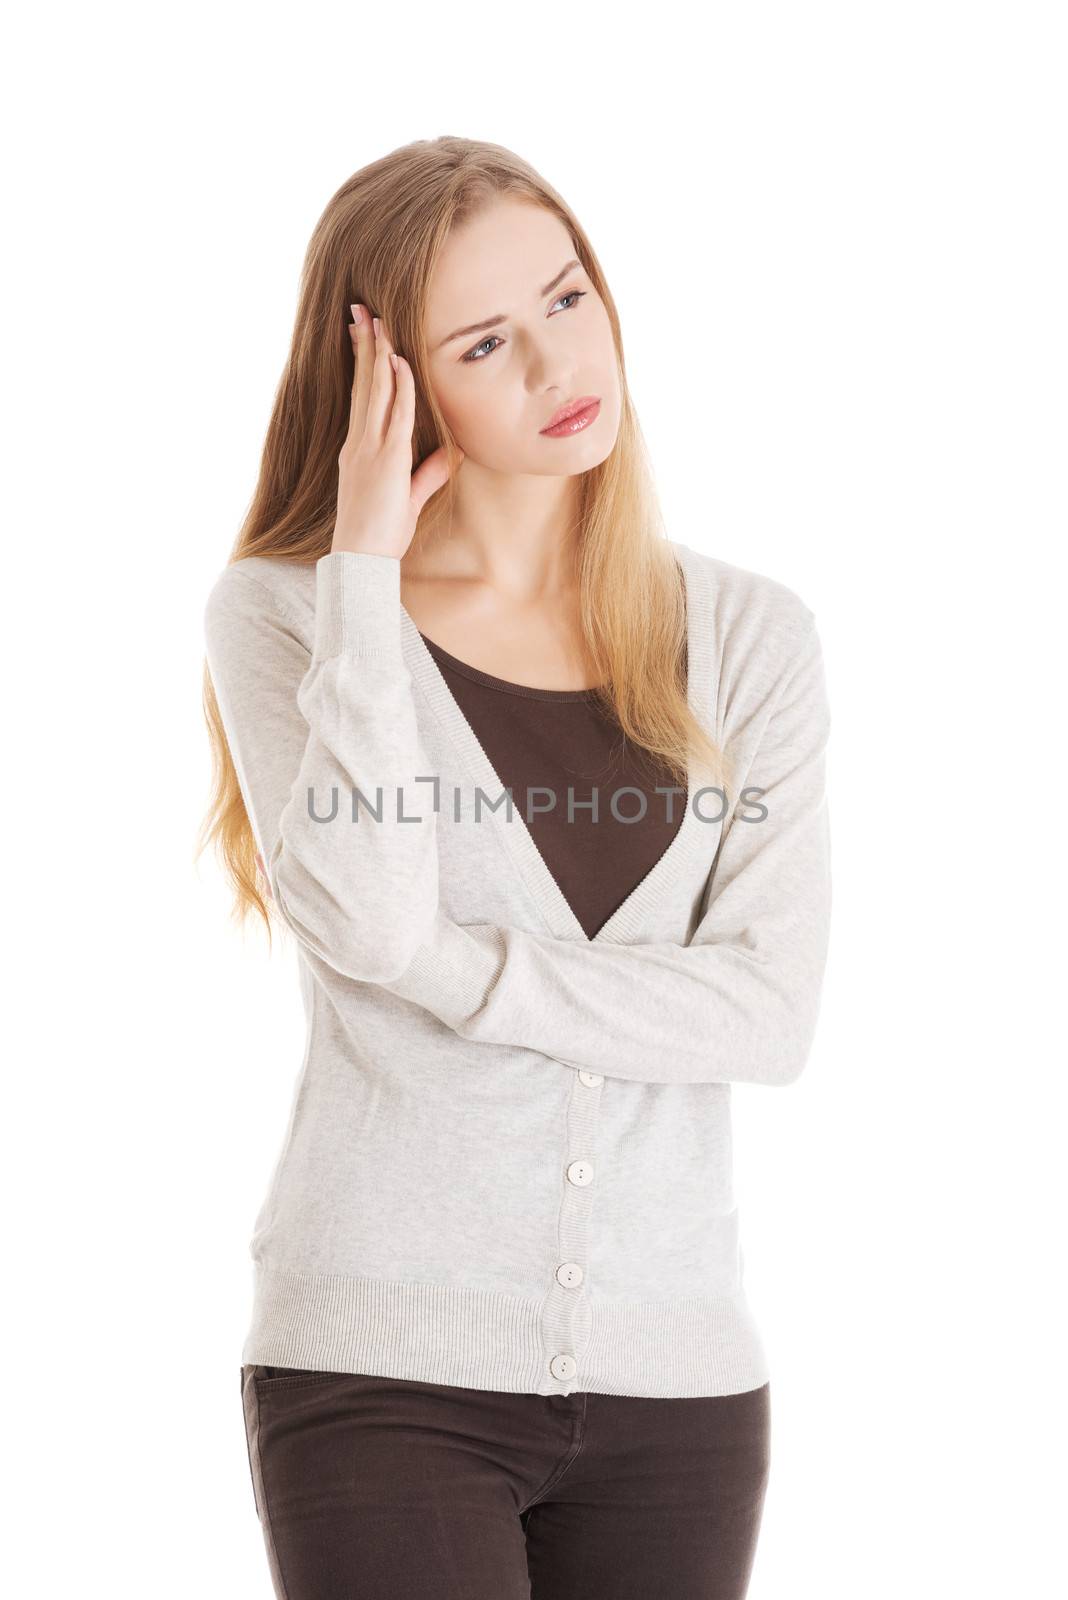 Beautiful casual woman looks worried. Isolated on white.